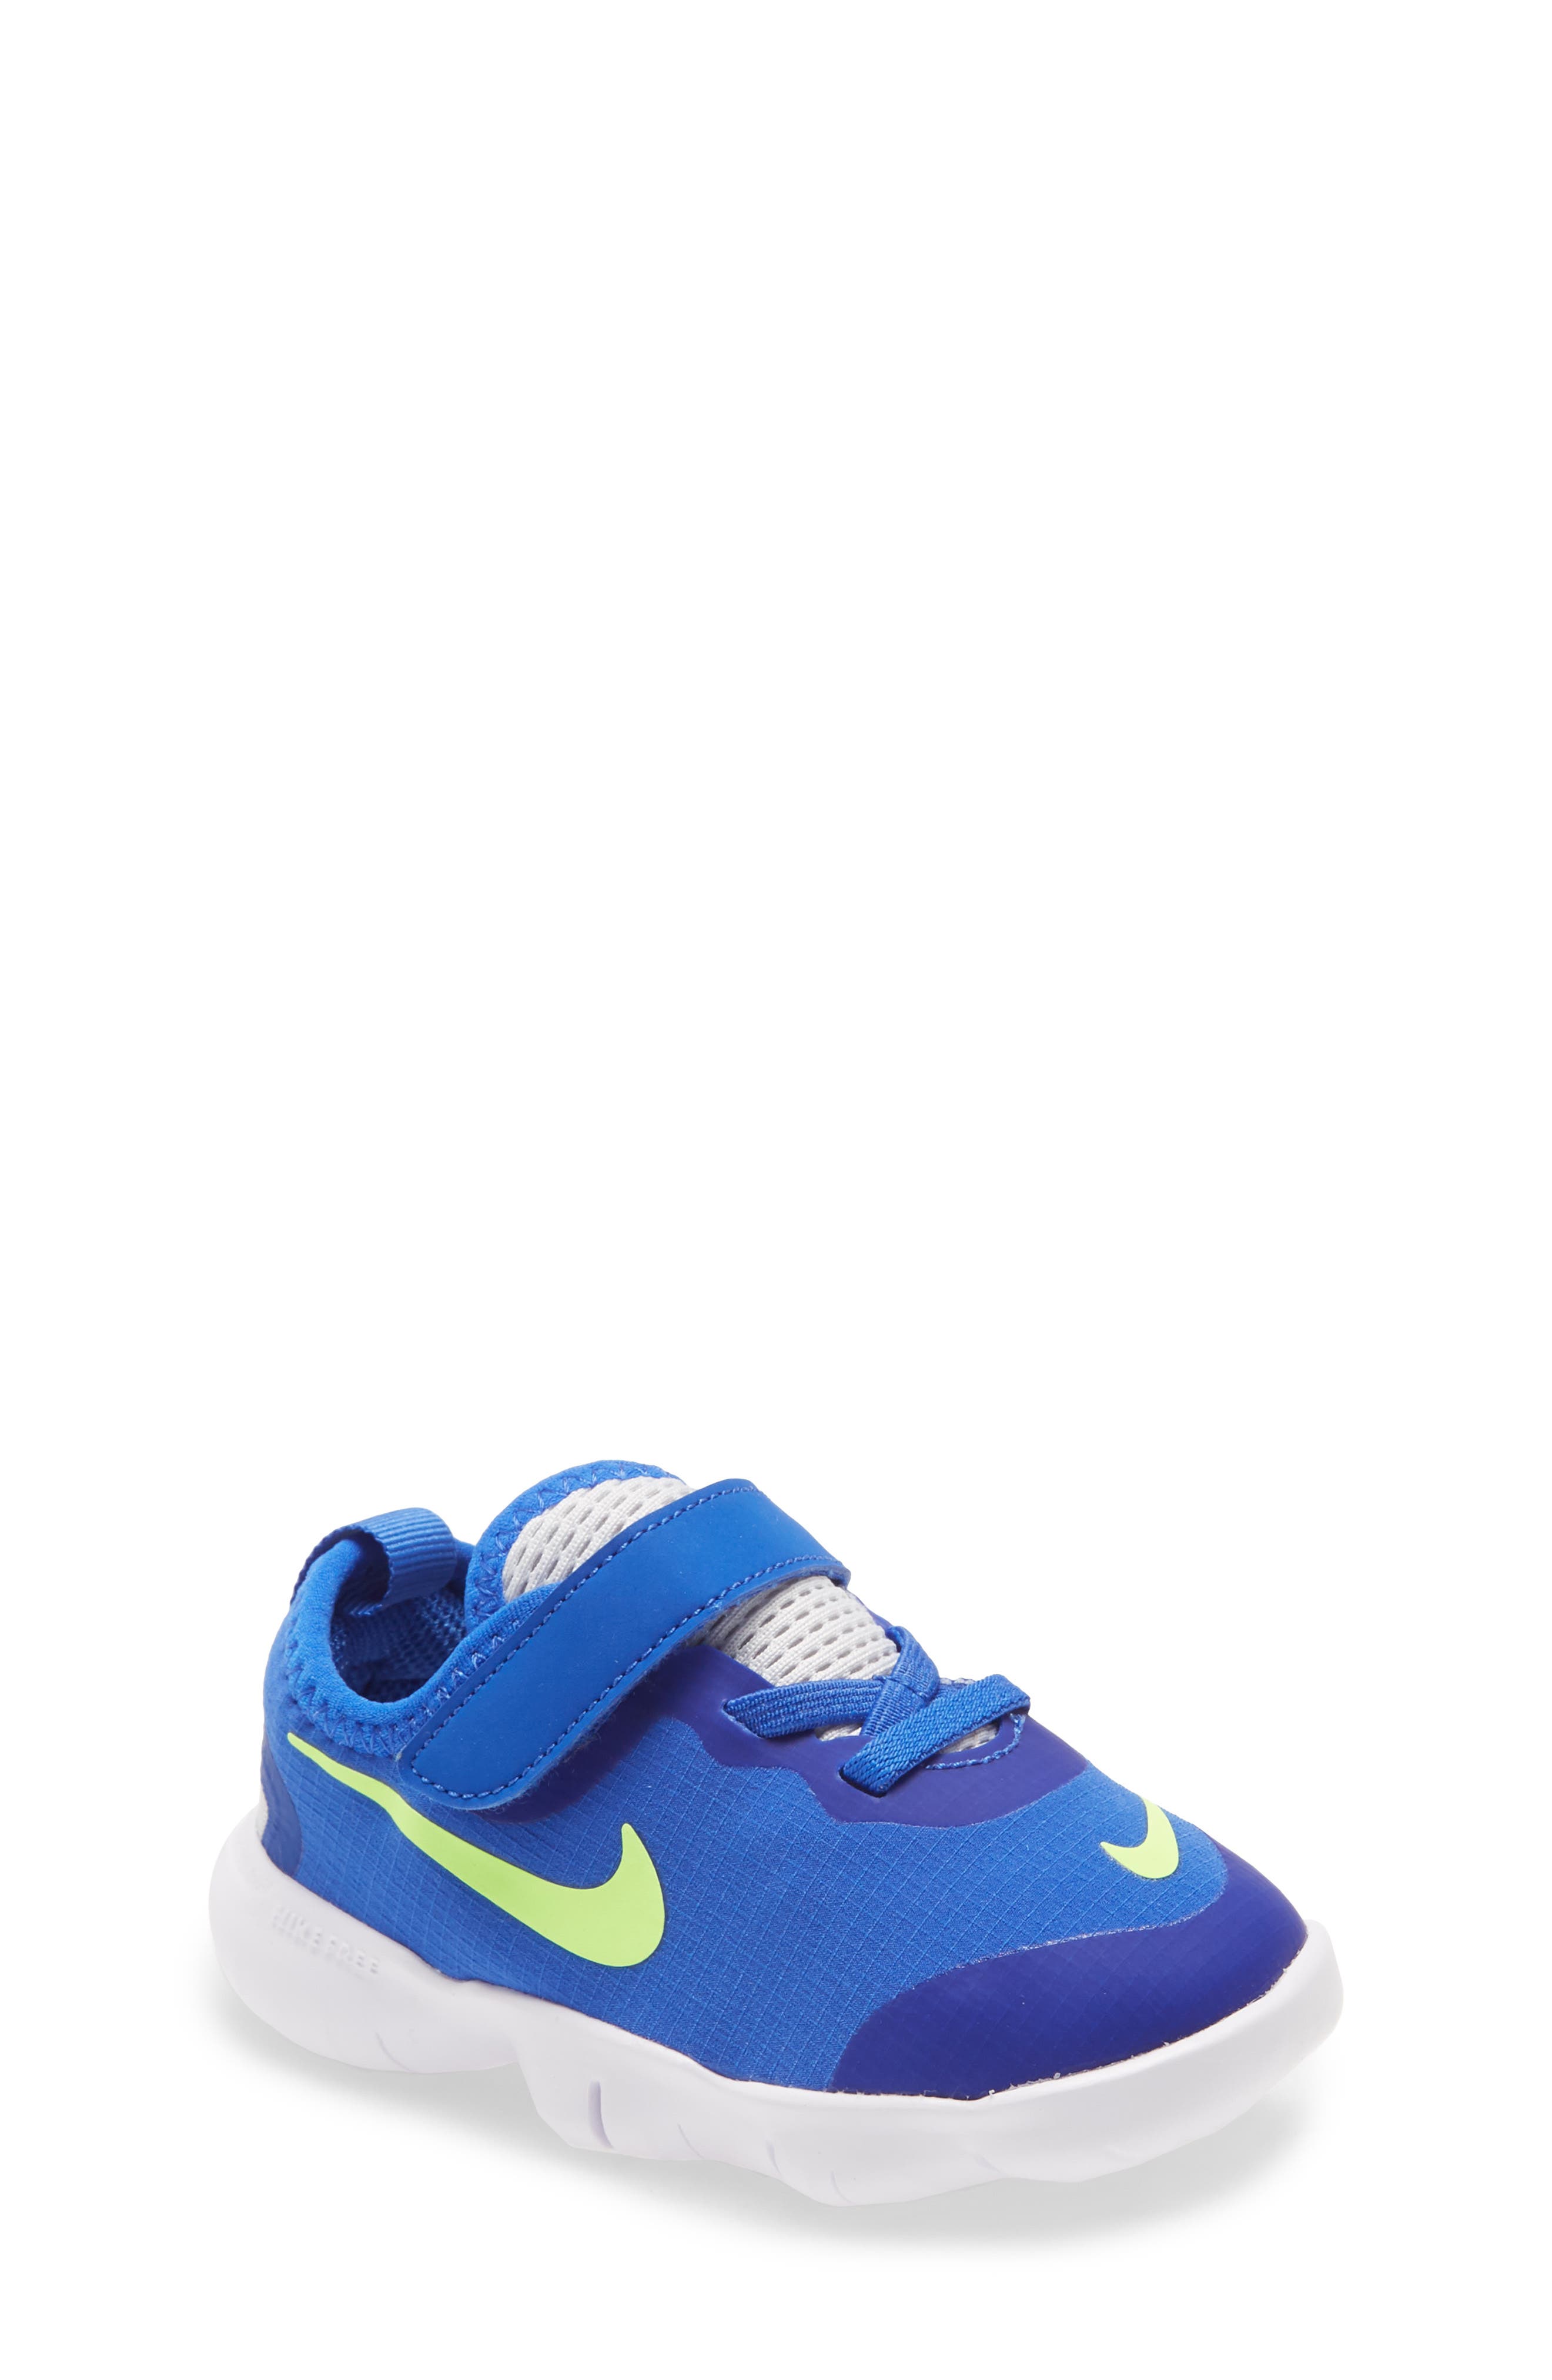 blue baby nike shoes